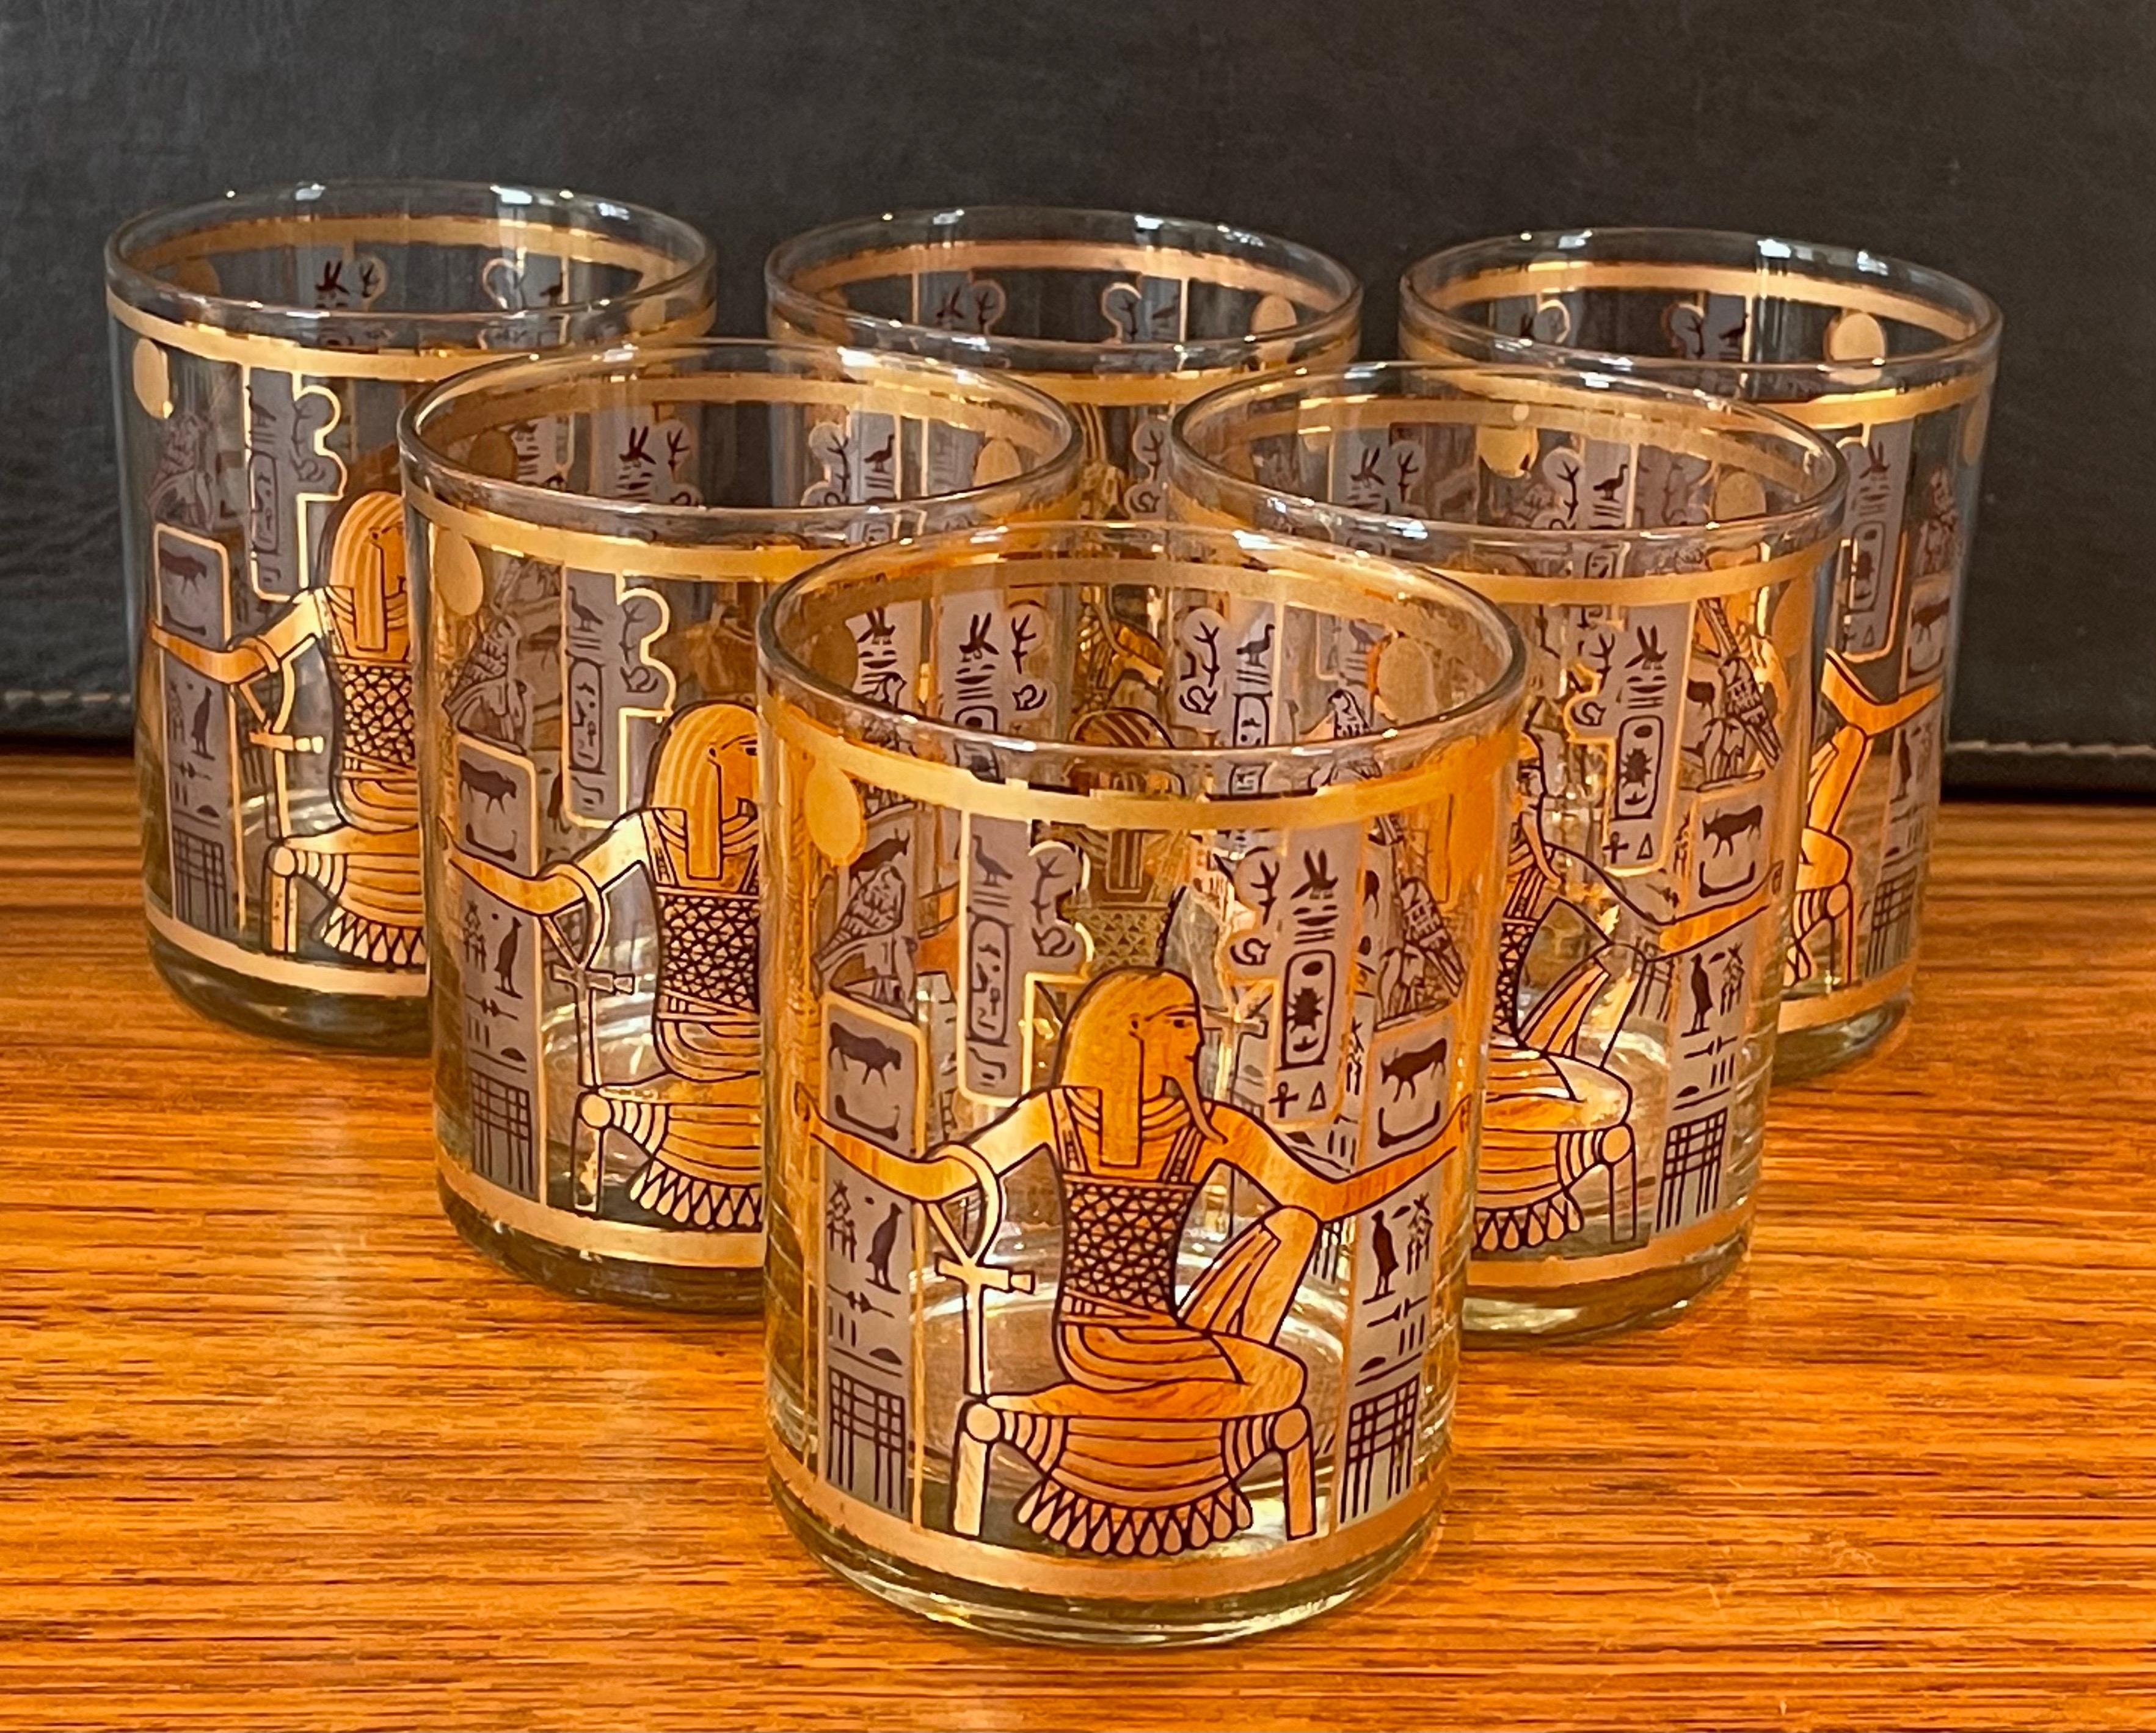 Fantastic set of six Egyptian style double old fashion cocktail glasses emblazoned with 22-karat gold artwork of pharaoh and cartouches by Culver Ltd., circa 1970s. The glasses are in very good condition with no cracks or chips and graphics are